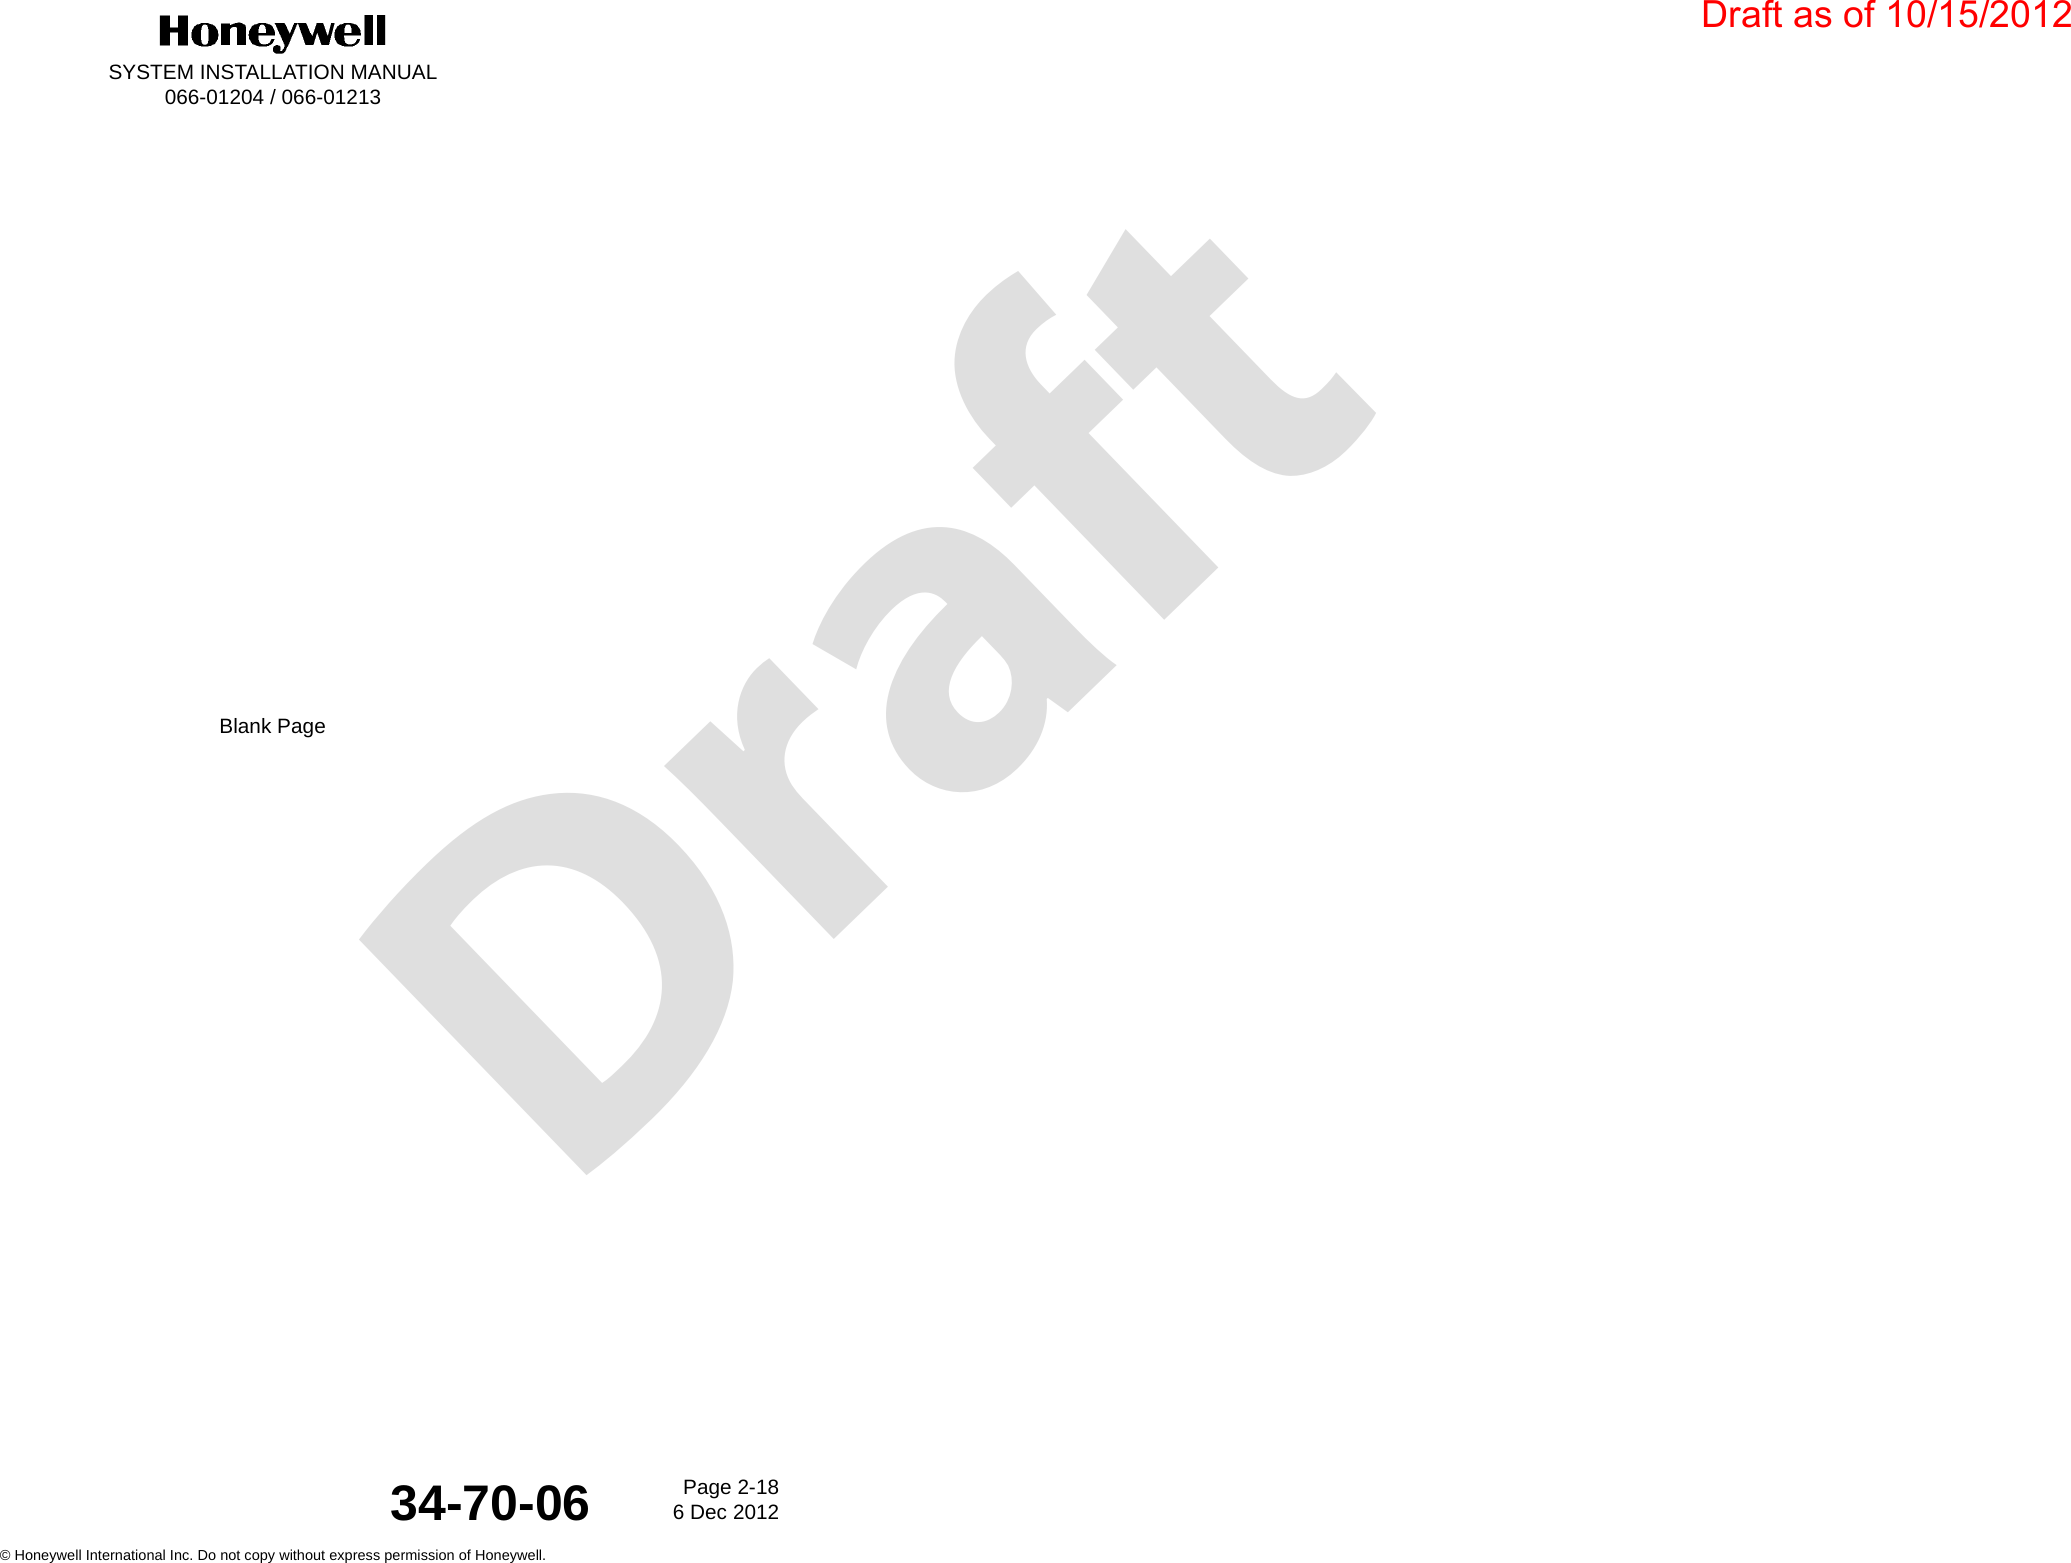 DraftSYSTEM INSTALLATION MANUAL066-01204 / 066-01213Page 2-186 Dec 2012© Honeywell International Inc. Do not copy without express permission of Honeywell.34-70-06Blank PageDraft as of 10/15/2012